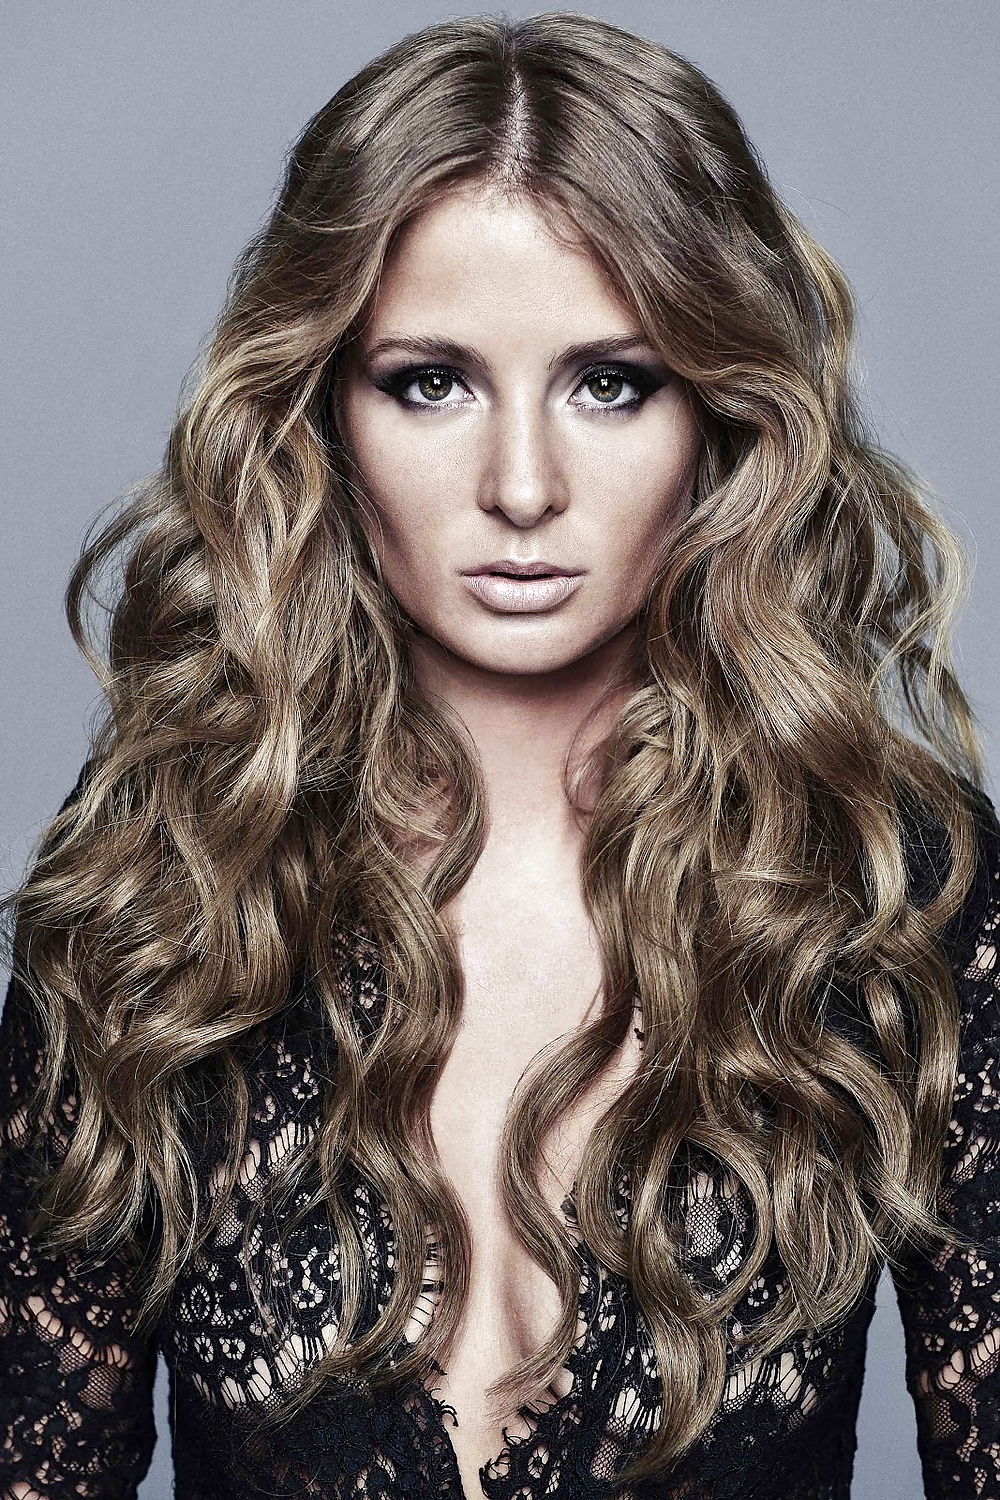 Millie Mackintosh - Made In Chelsea #17740361